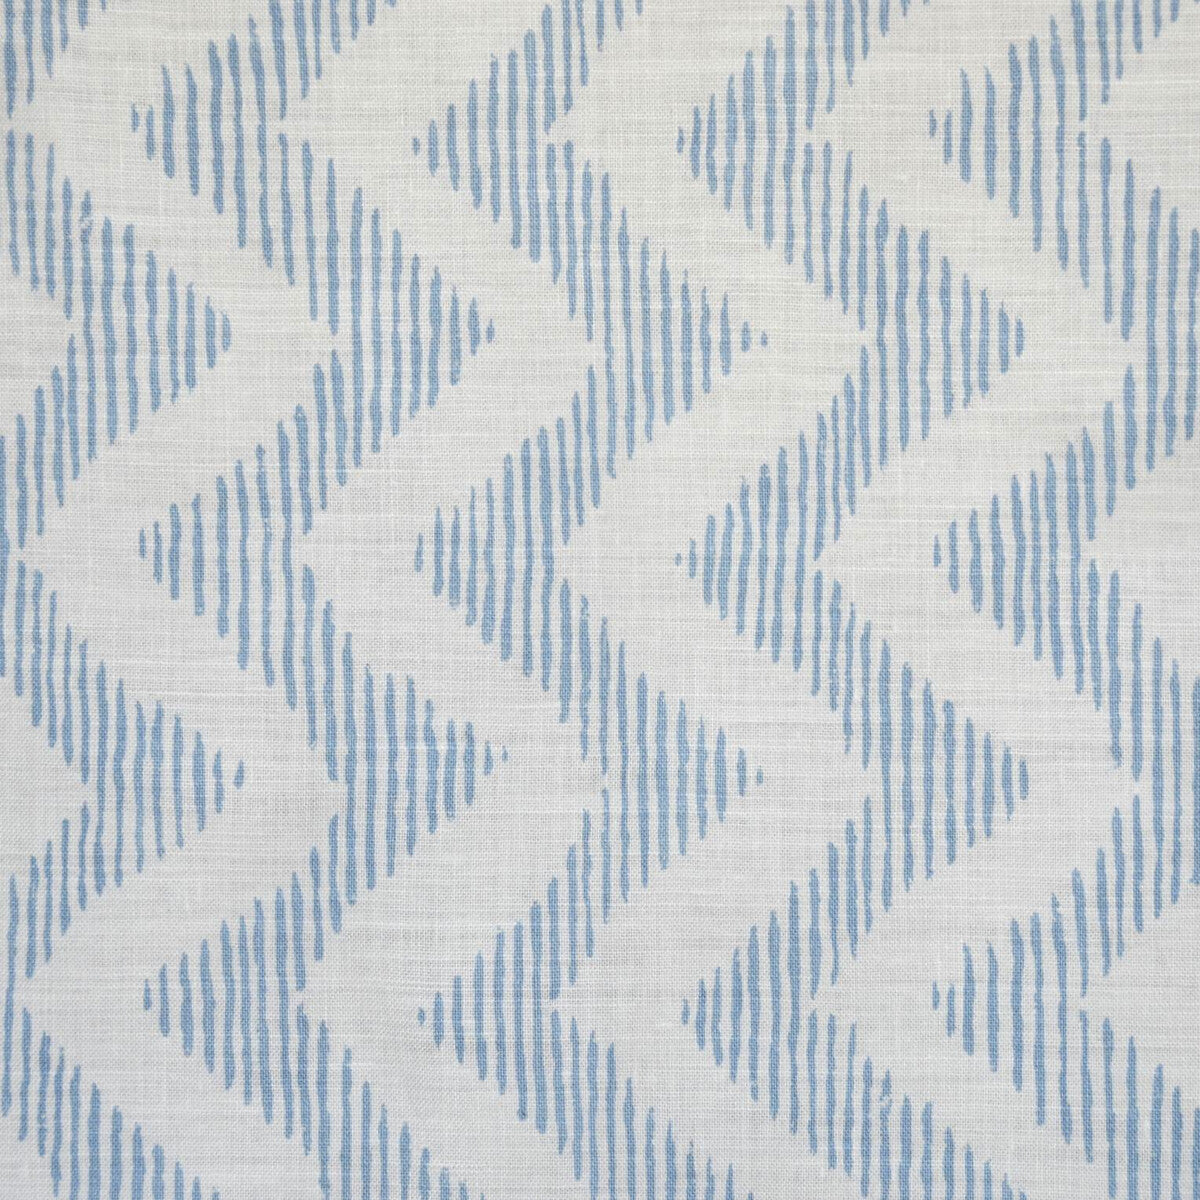 Colebrook fabric in blue/oyster color - pattern BFC-3632.51.0 - by Lee Jofa in the Blithfield collection